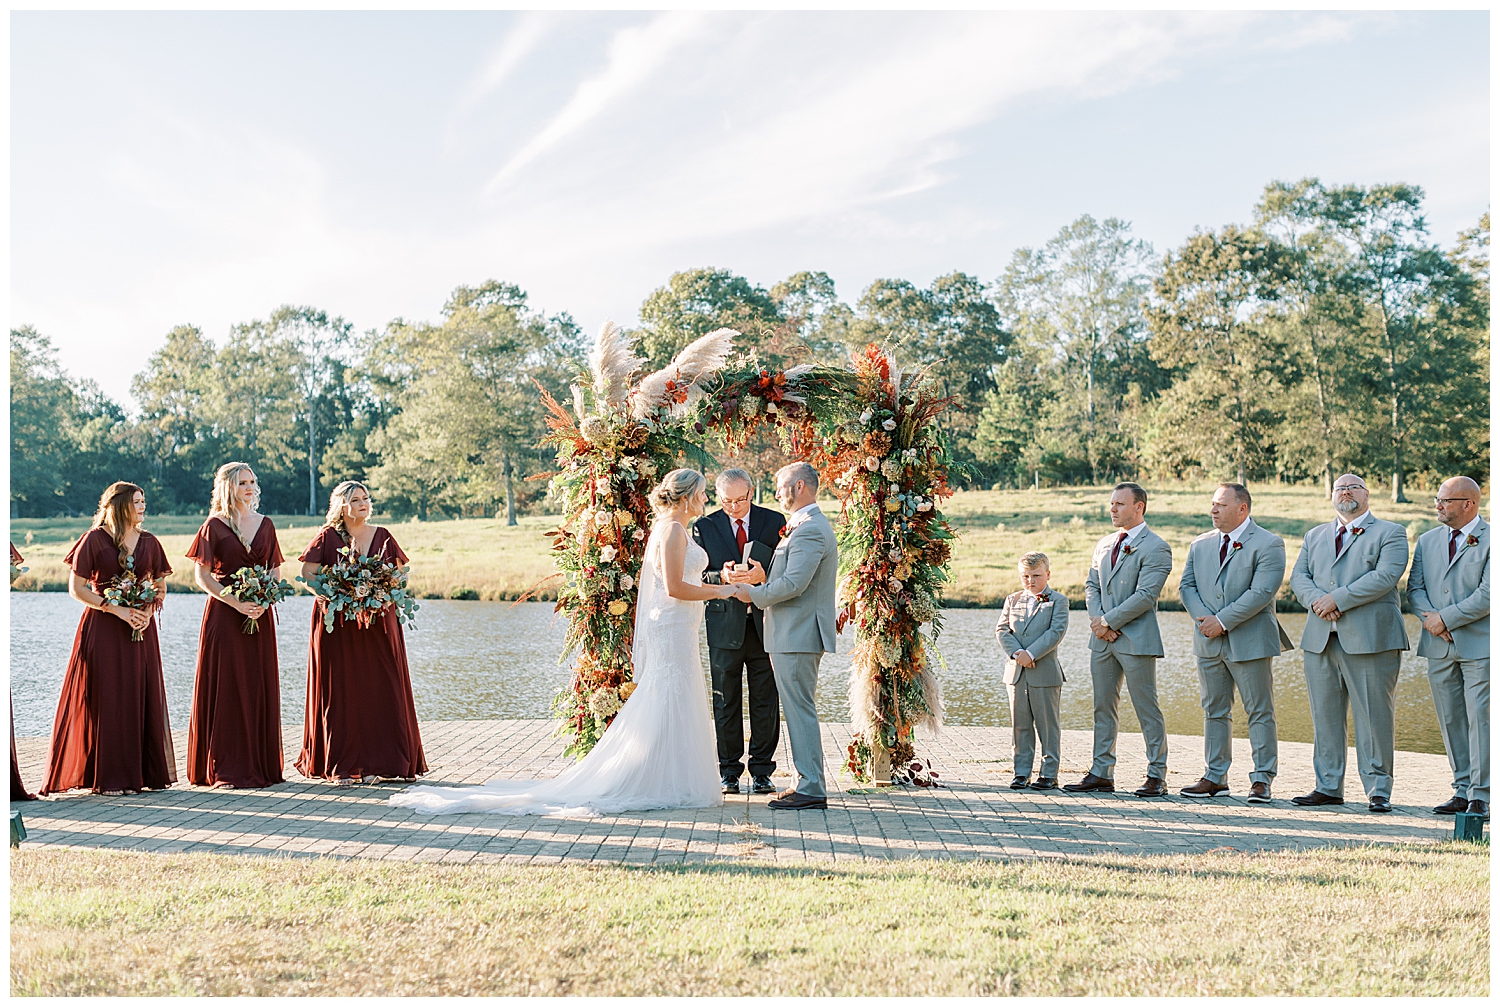 A wedding ceremony takes place in front of a lake at Three Lakes Manor in Poplarville.